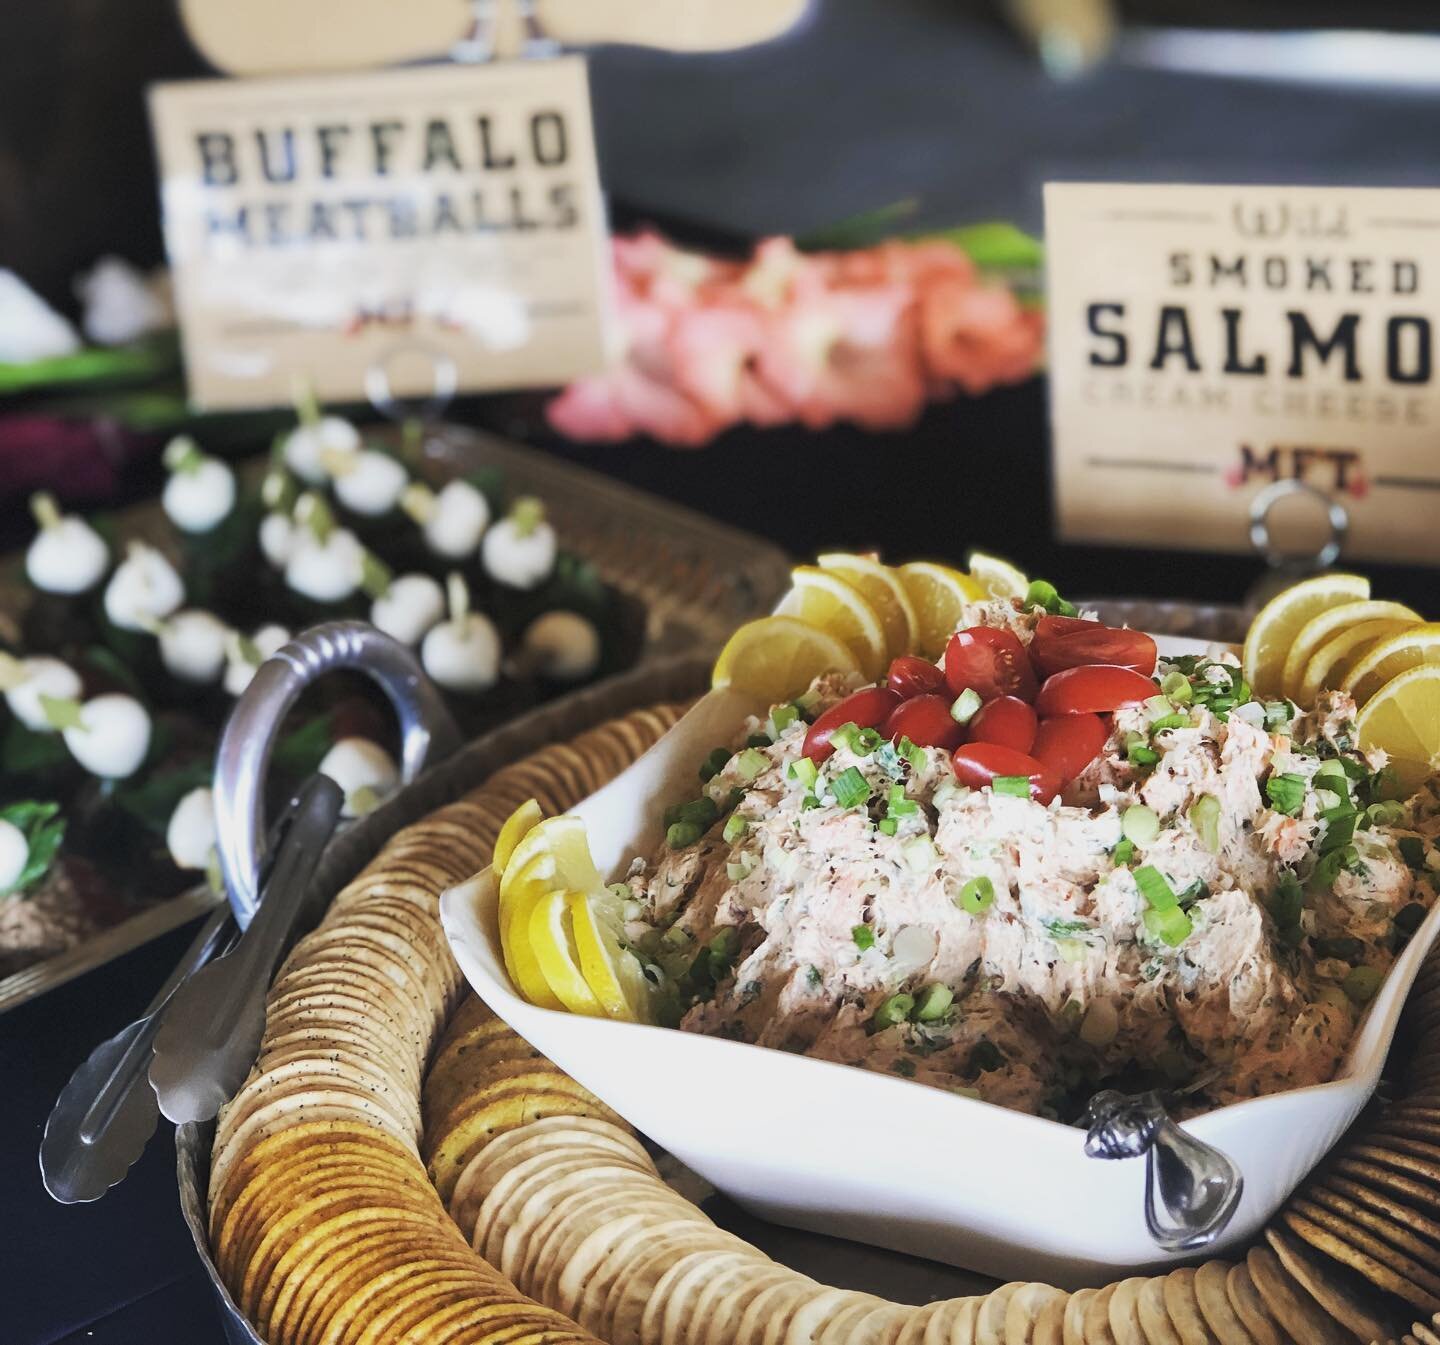 Holiday Party season is upon us! December dates are almost booked up - DM us now to reserve your party date! 
.
.
.
#mft #mftcatering #mftsauce #boisefood #boisefoodie #christmasparty #holidayparties #horderves #appetizers #holidayappetizers #boiseho